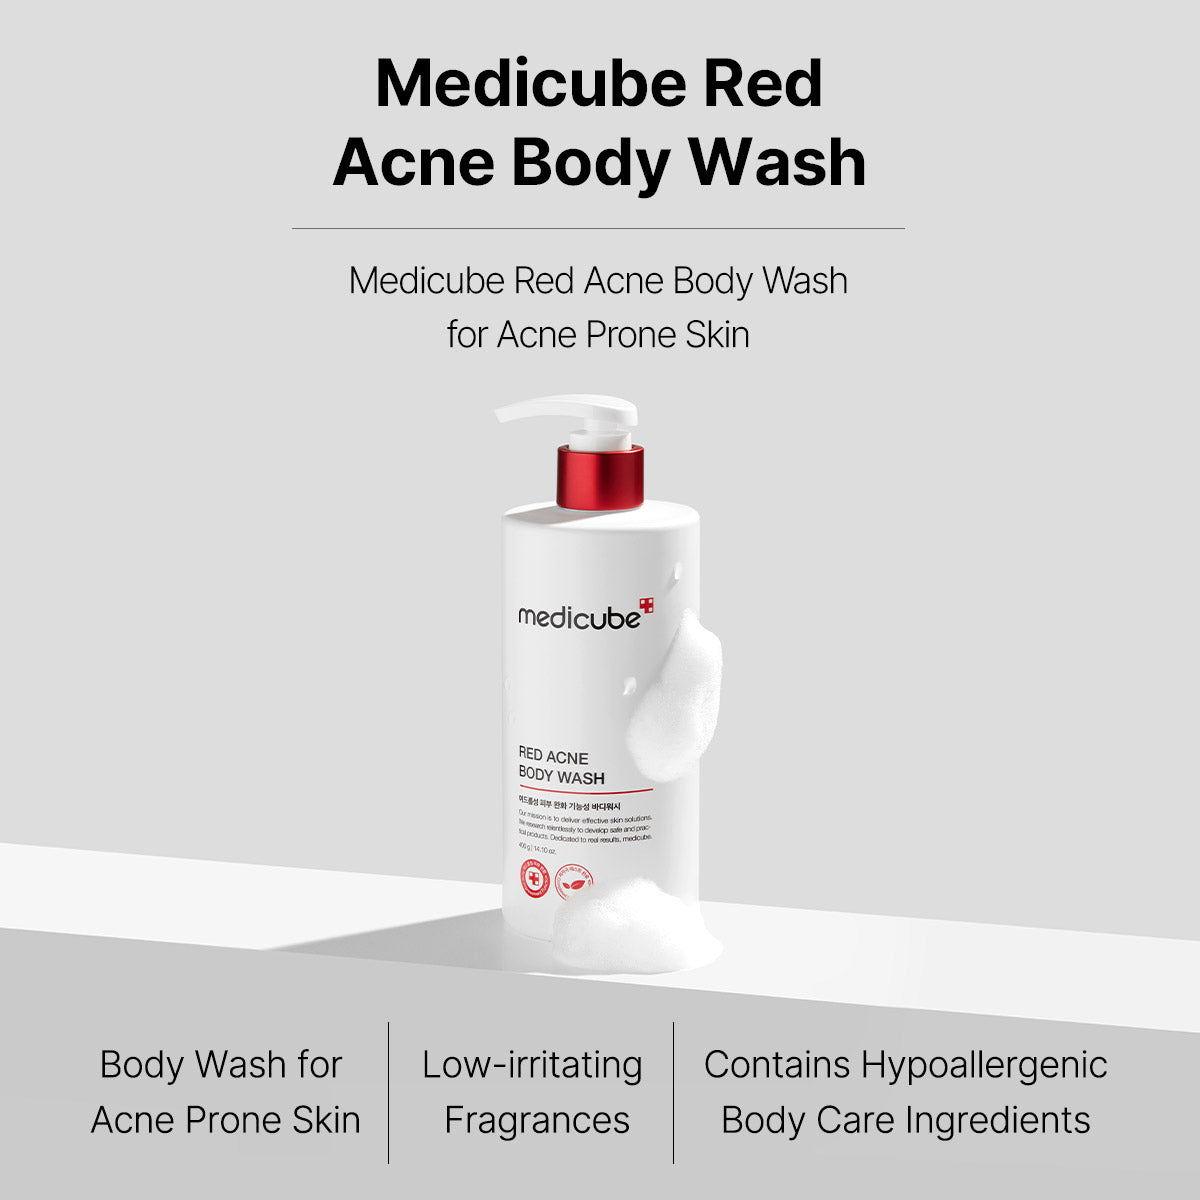 Red Acne Body Wash